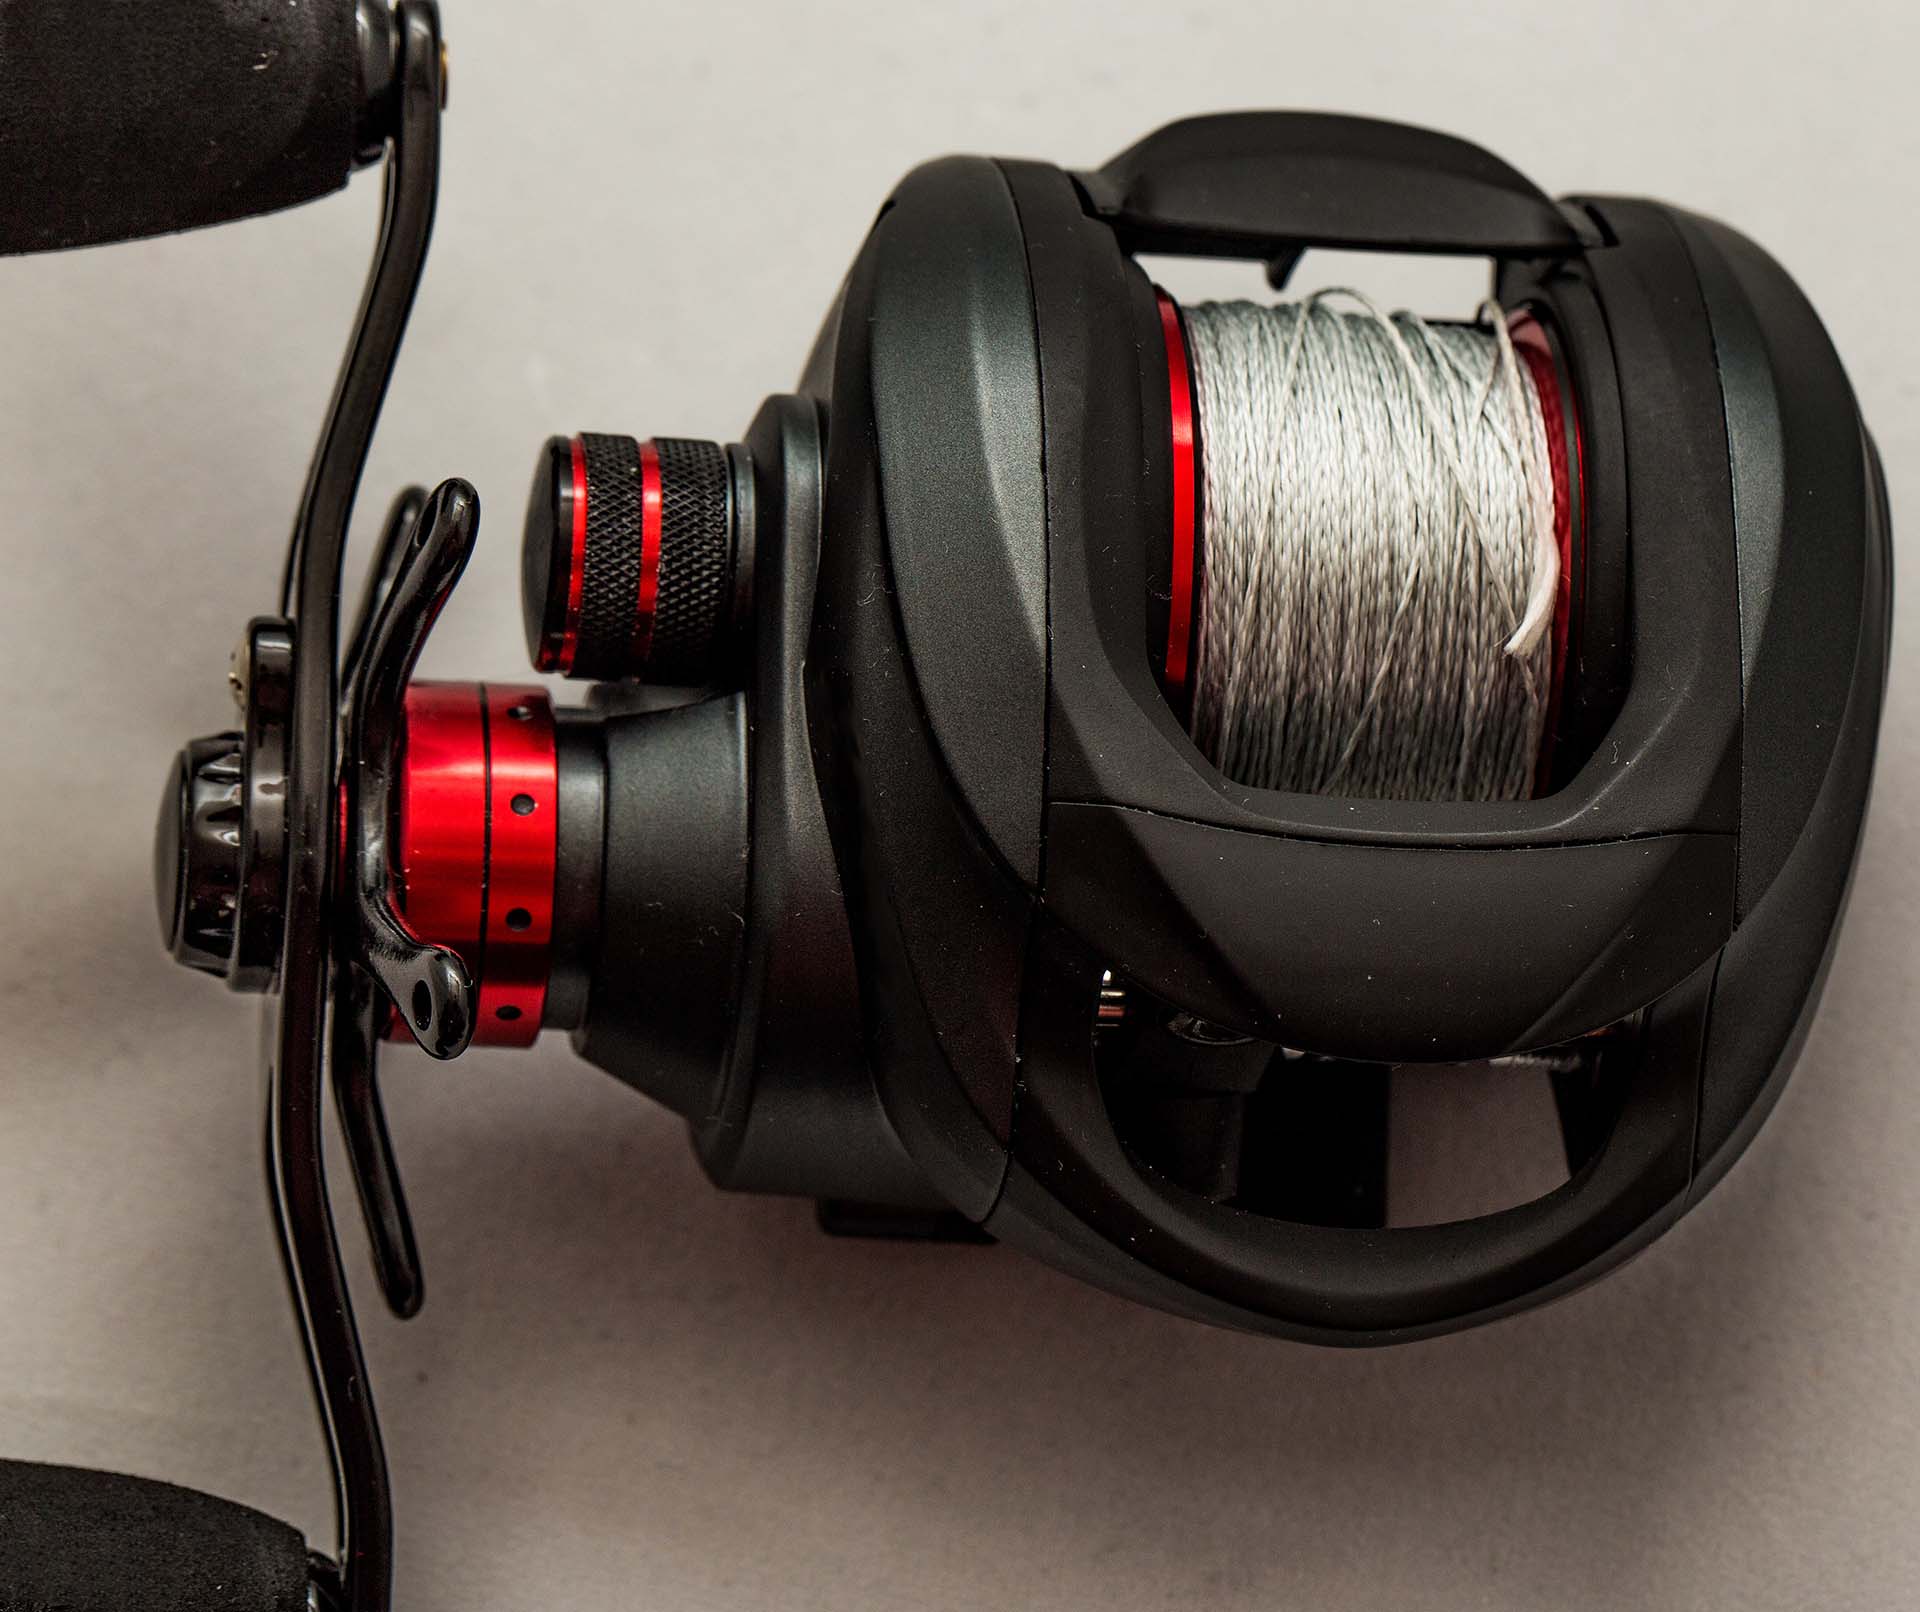 Close-up of baitcasting reel loaded with braided line